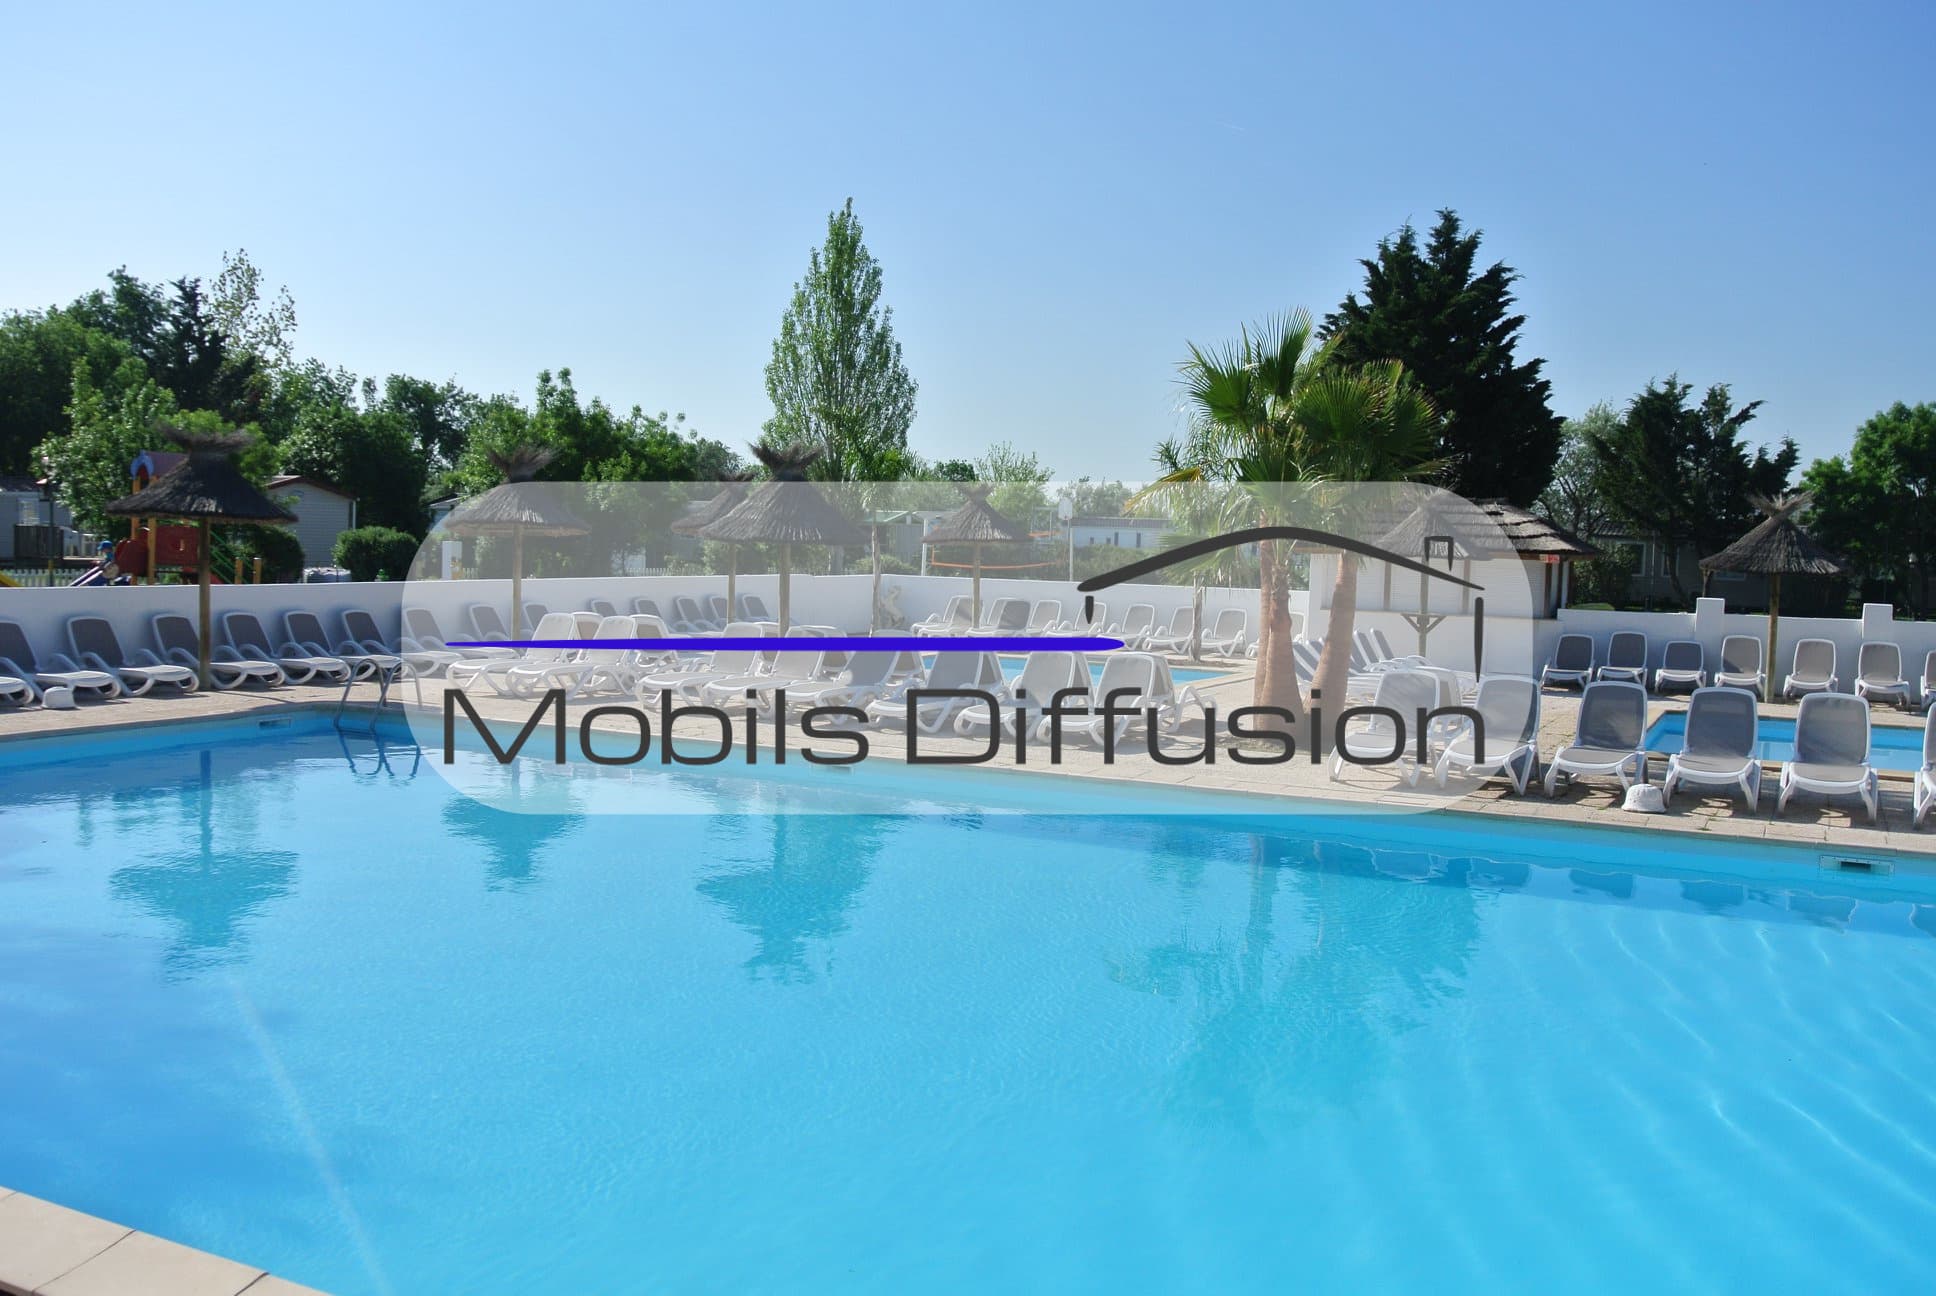 Mobils Diffusion - Camping plot for mobile homes in the center of the Camargue